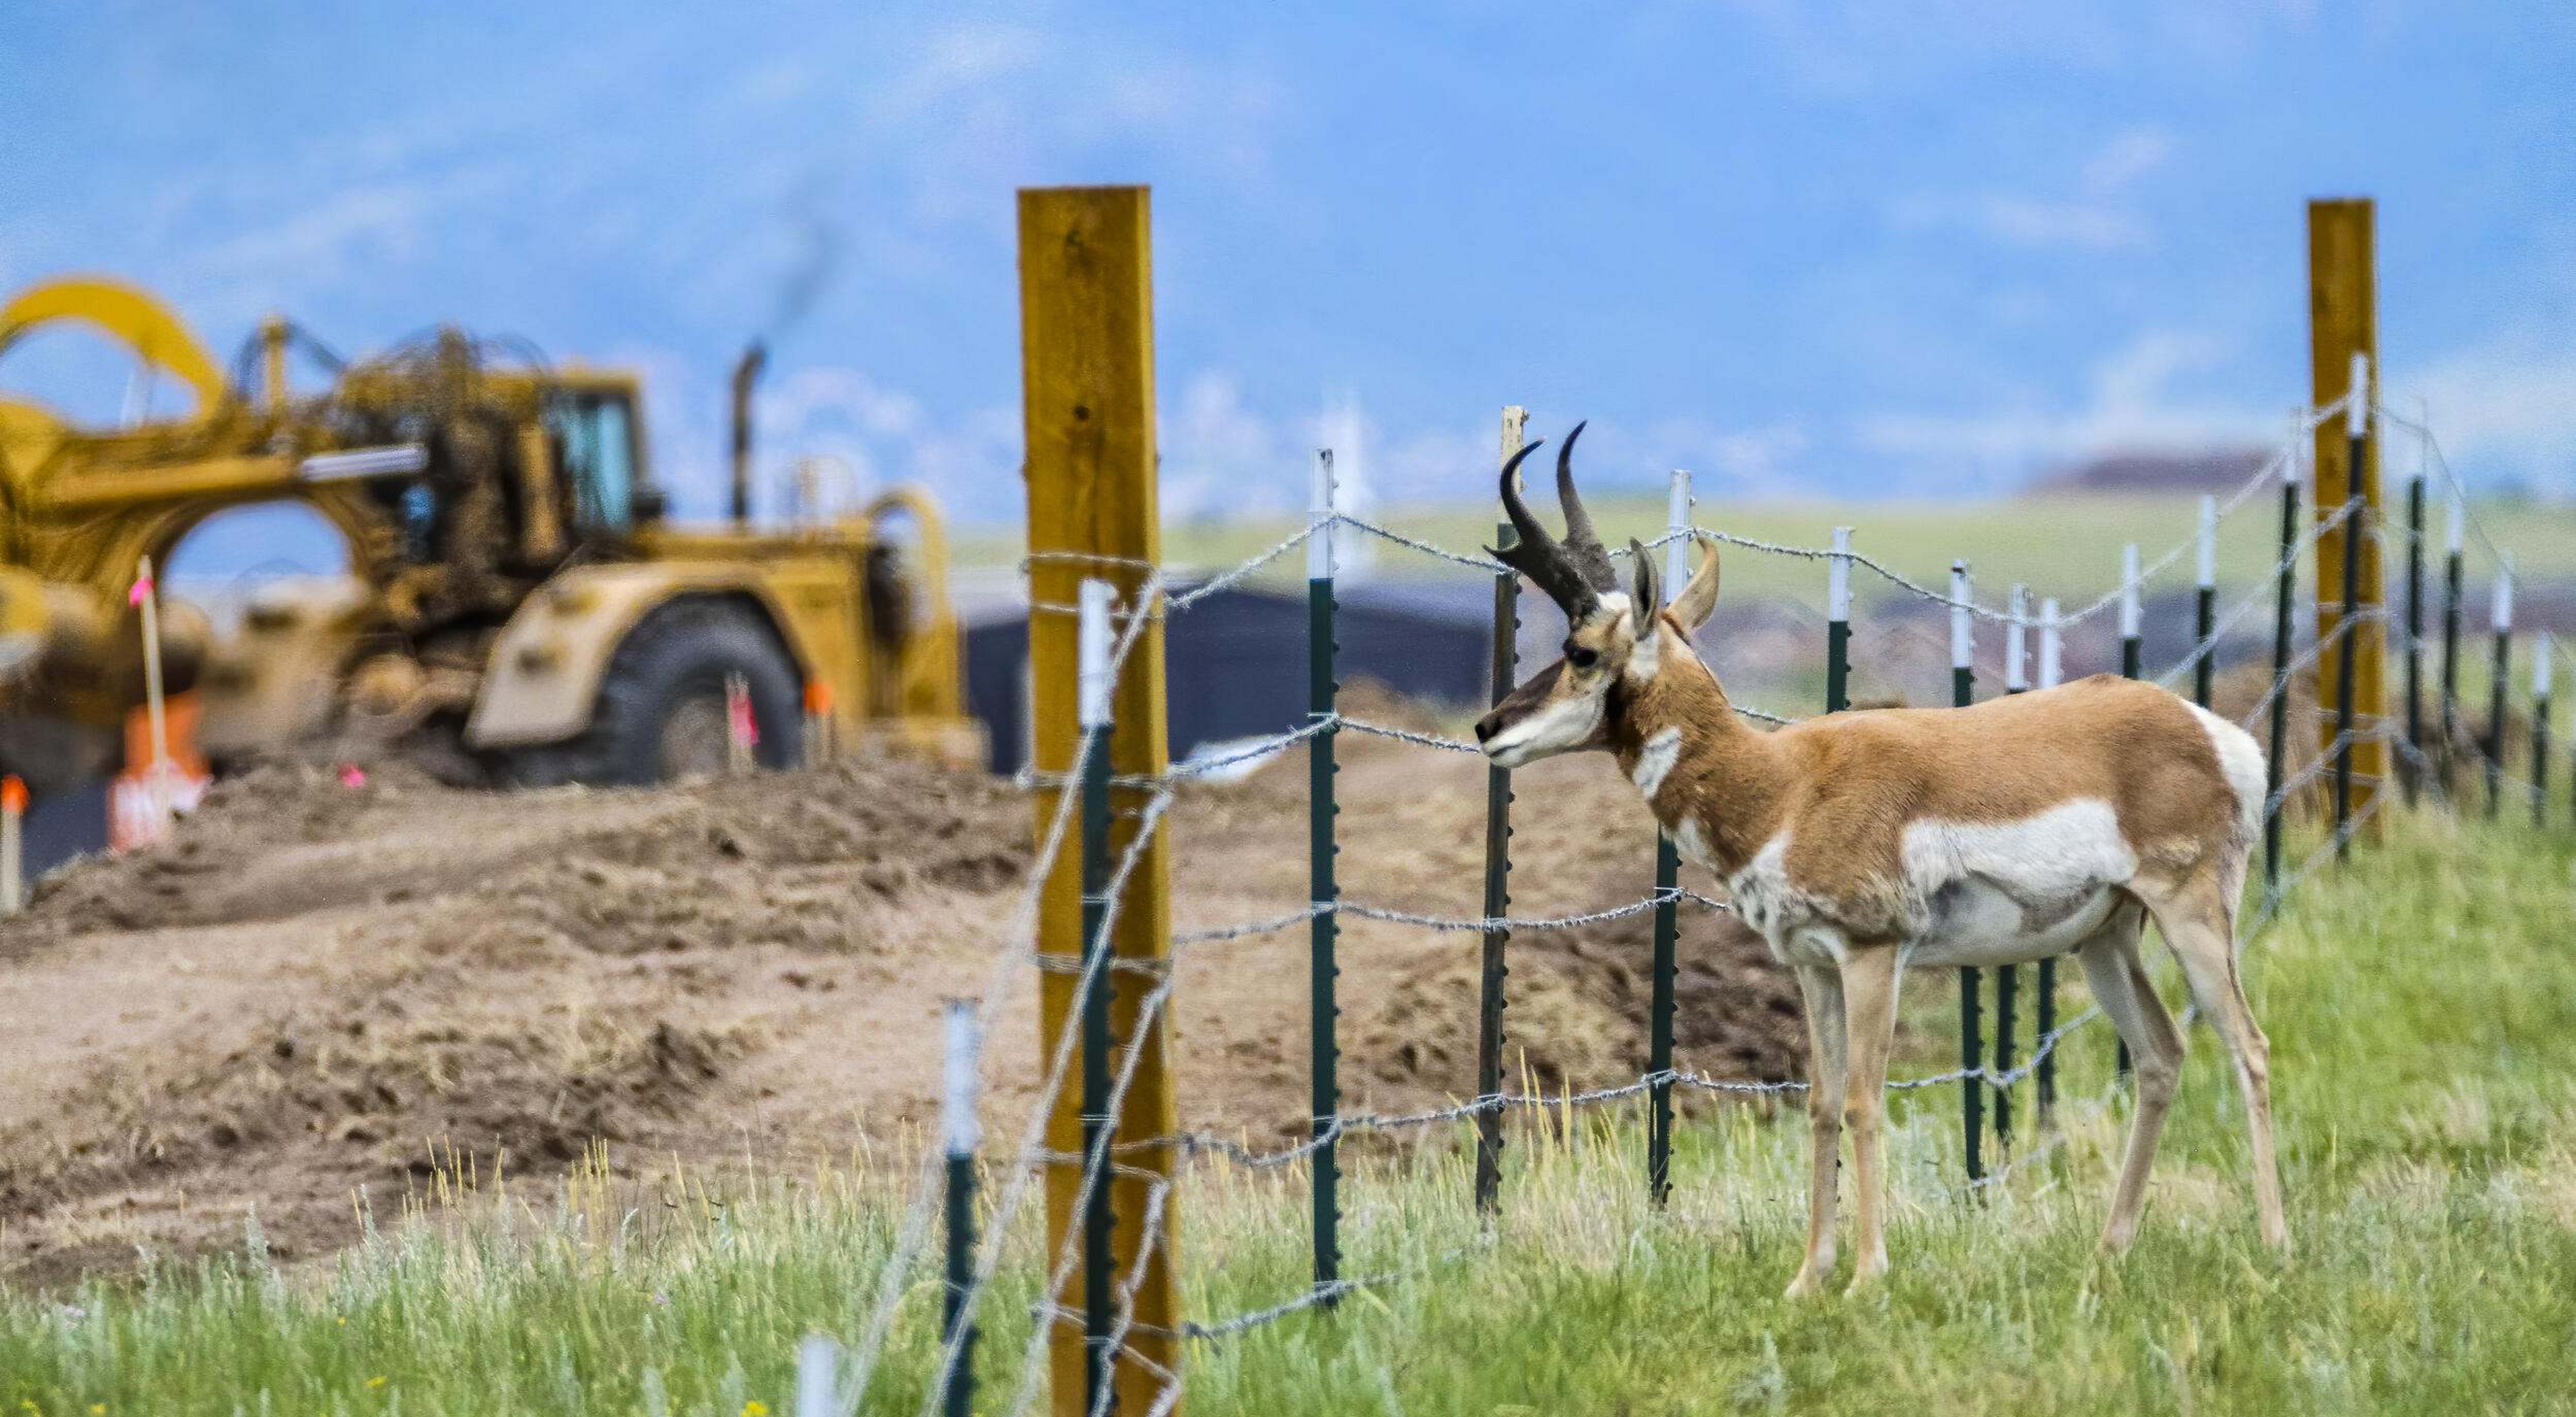 A pronghorn looking at a construction site through a fence.